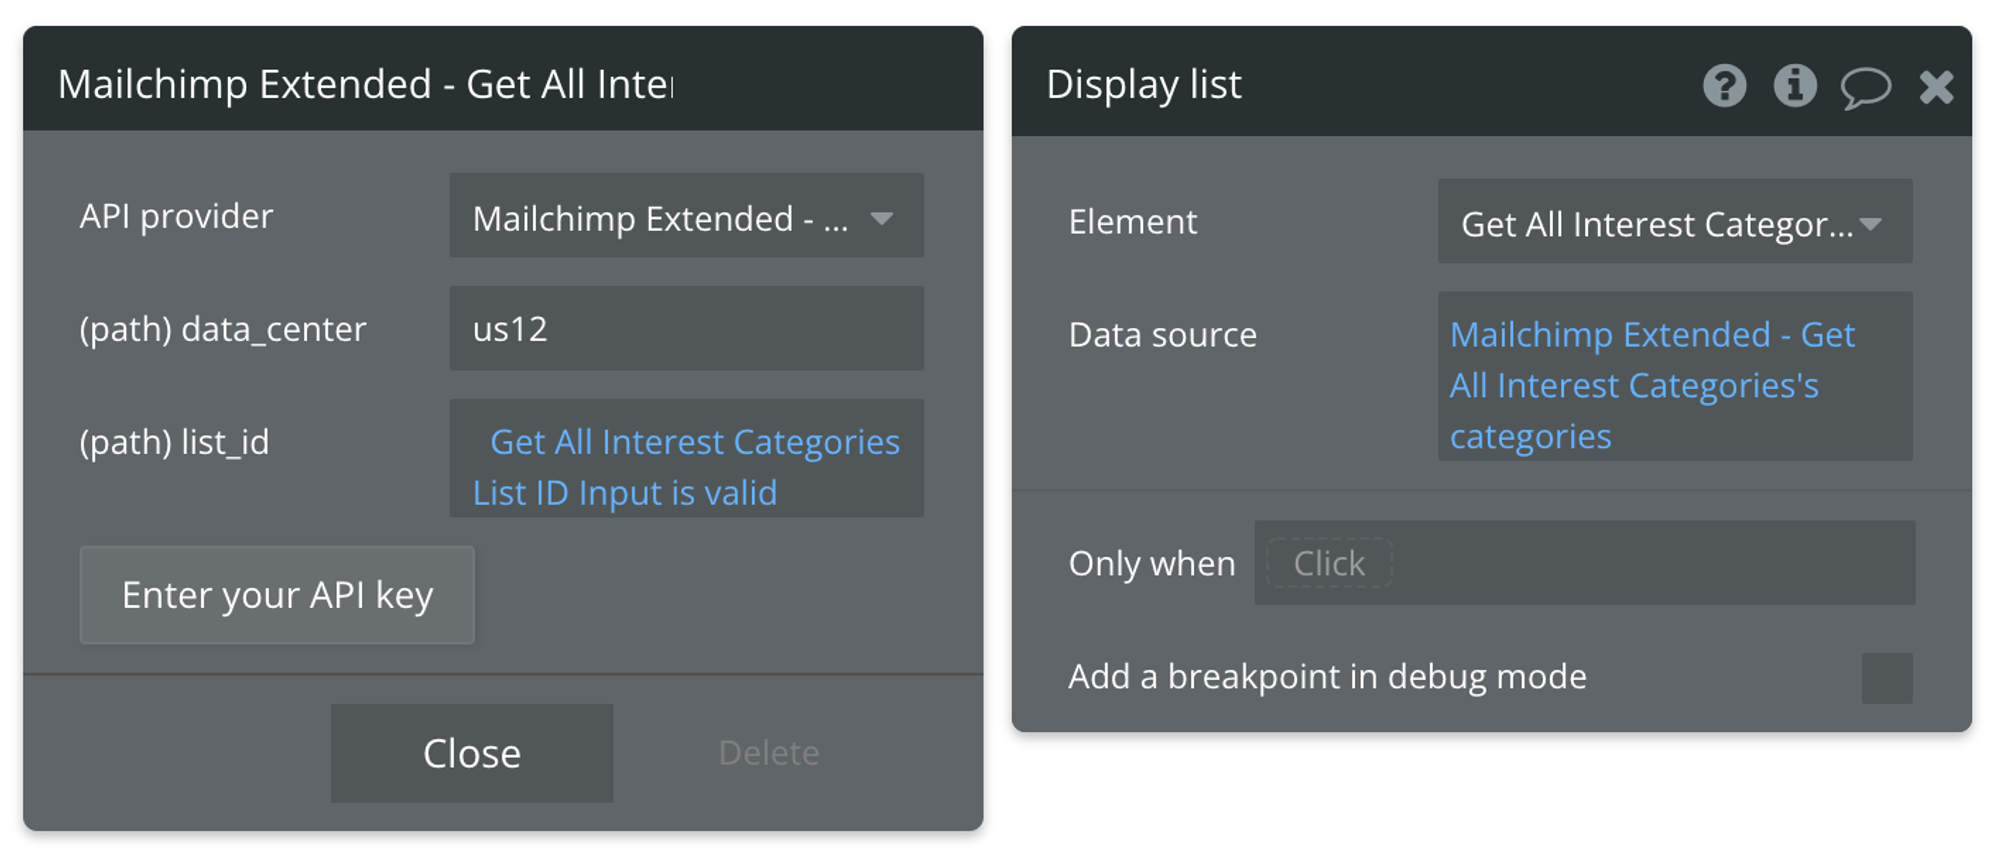 Select Mailchimp Extended - Get All Interest Categories's categories for the data source